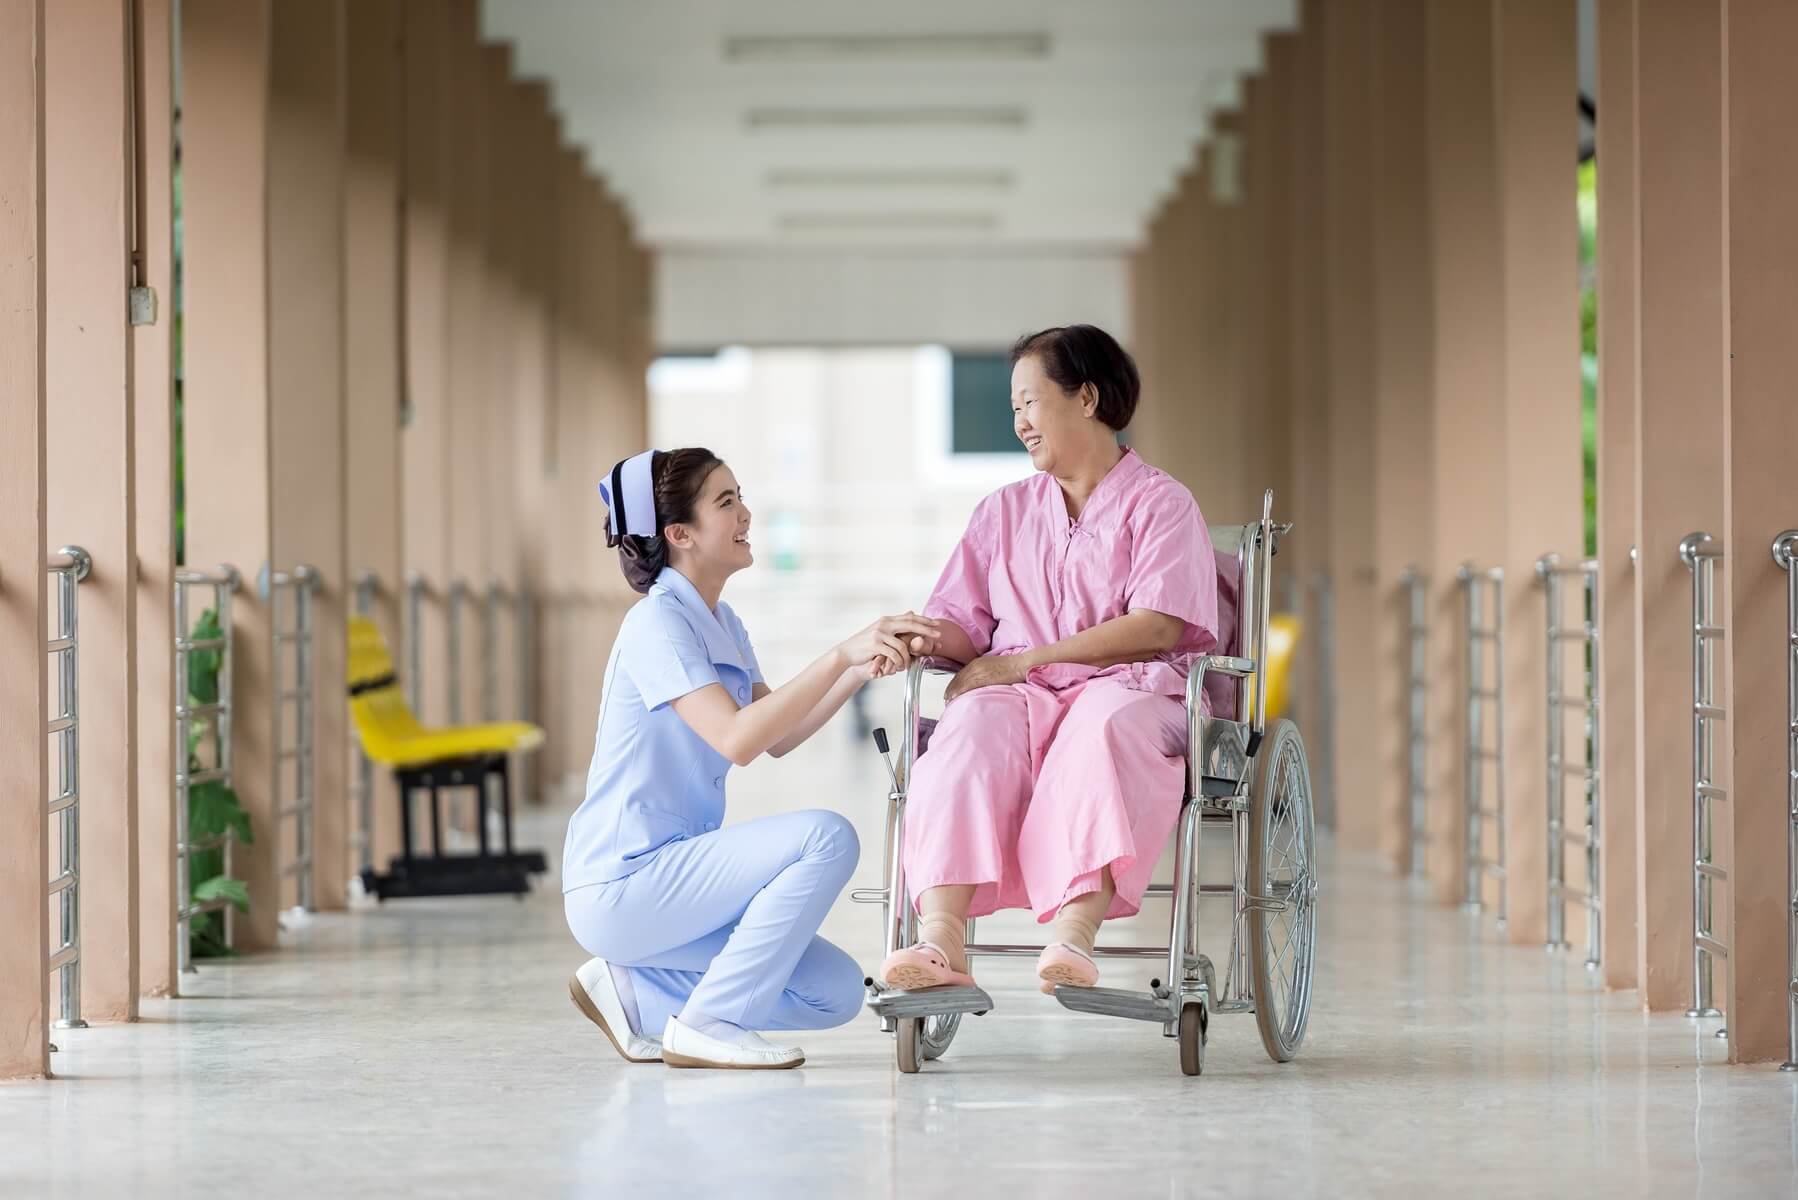 A physical therapist guiding a patient through rehabilitation exercises.